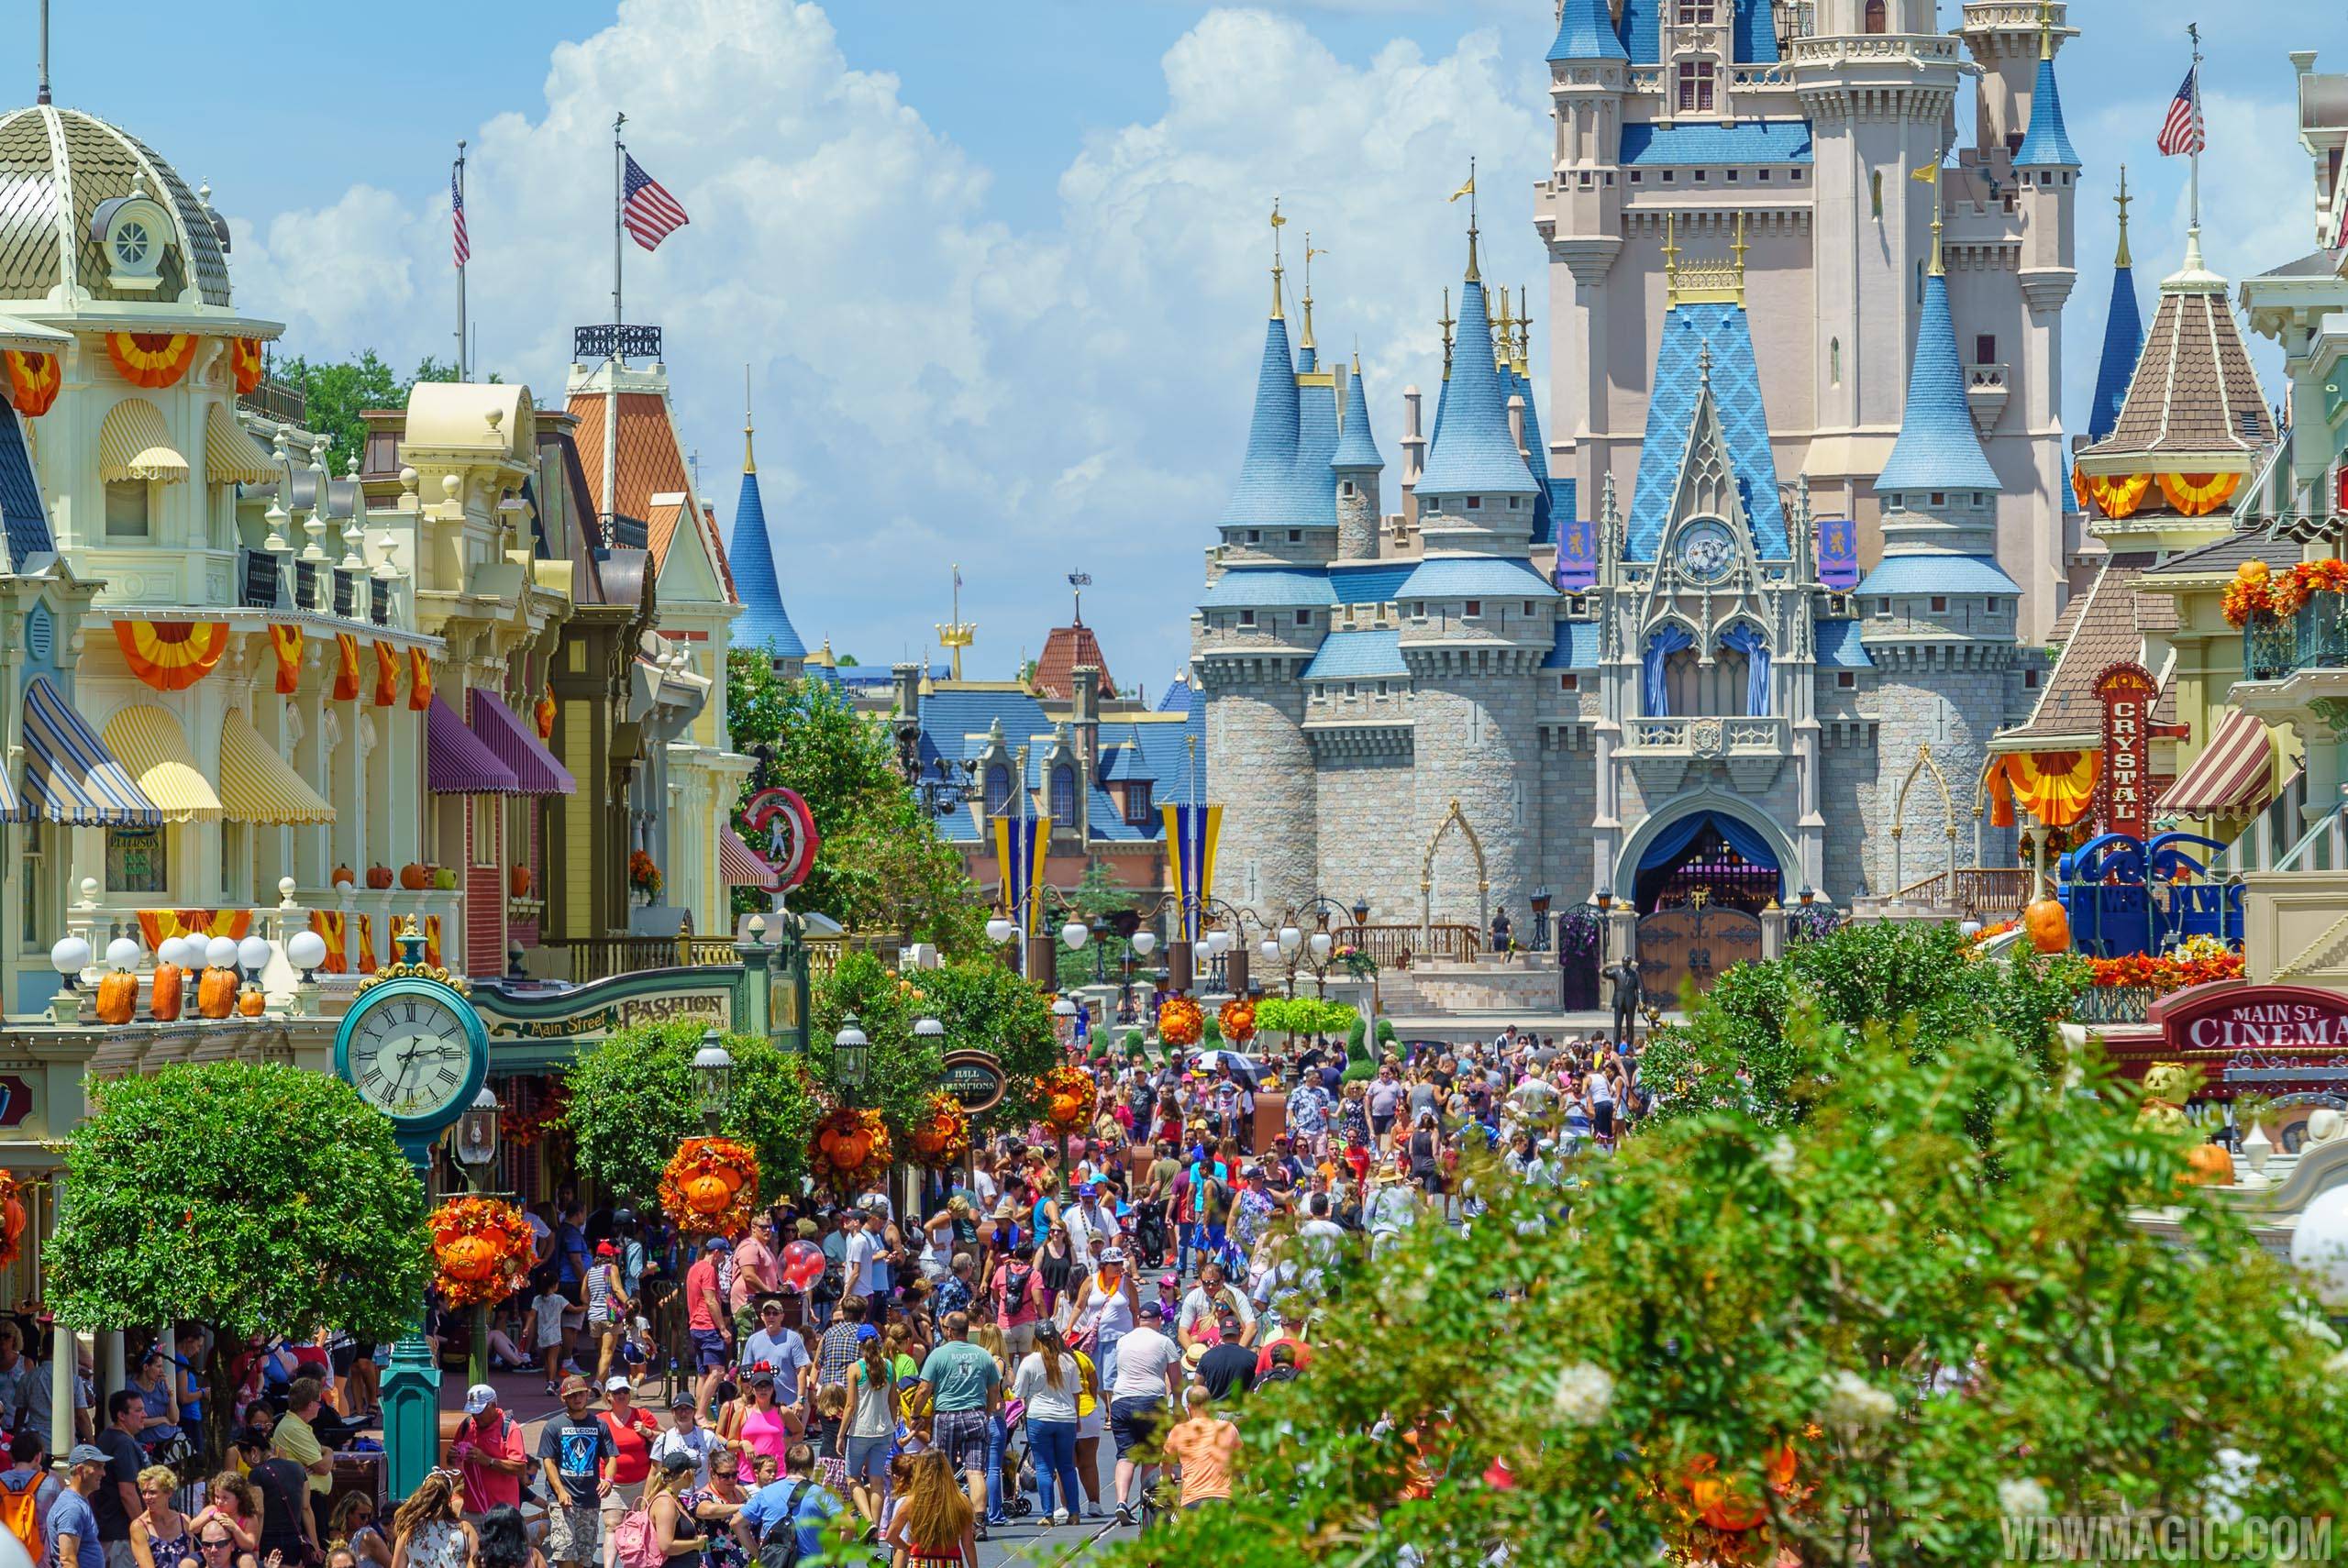 Halloween at the Magic Kingdom will look very different from heavy crowds seen in previous years